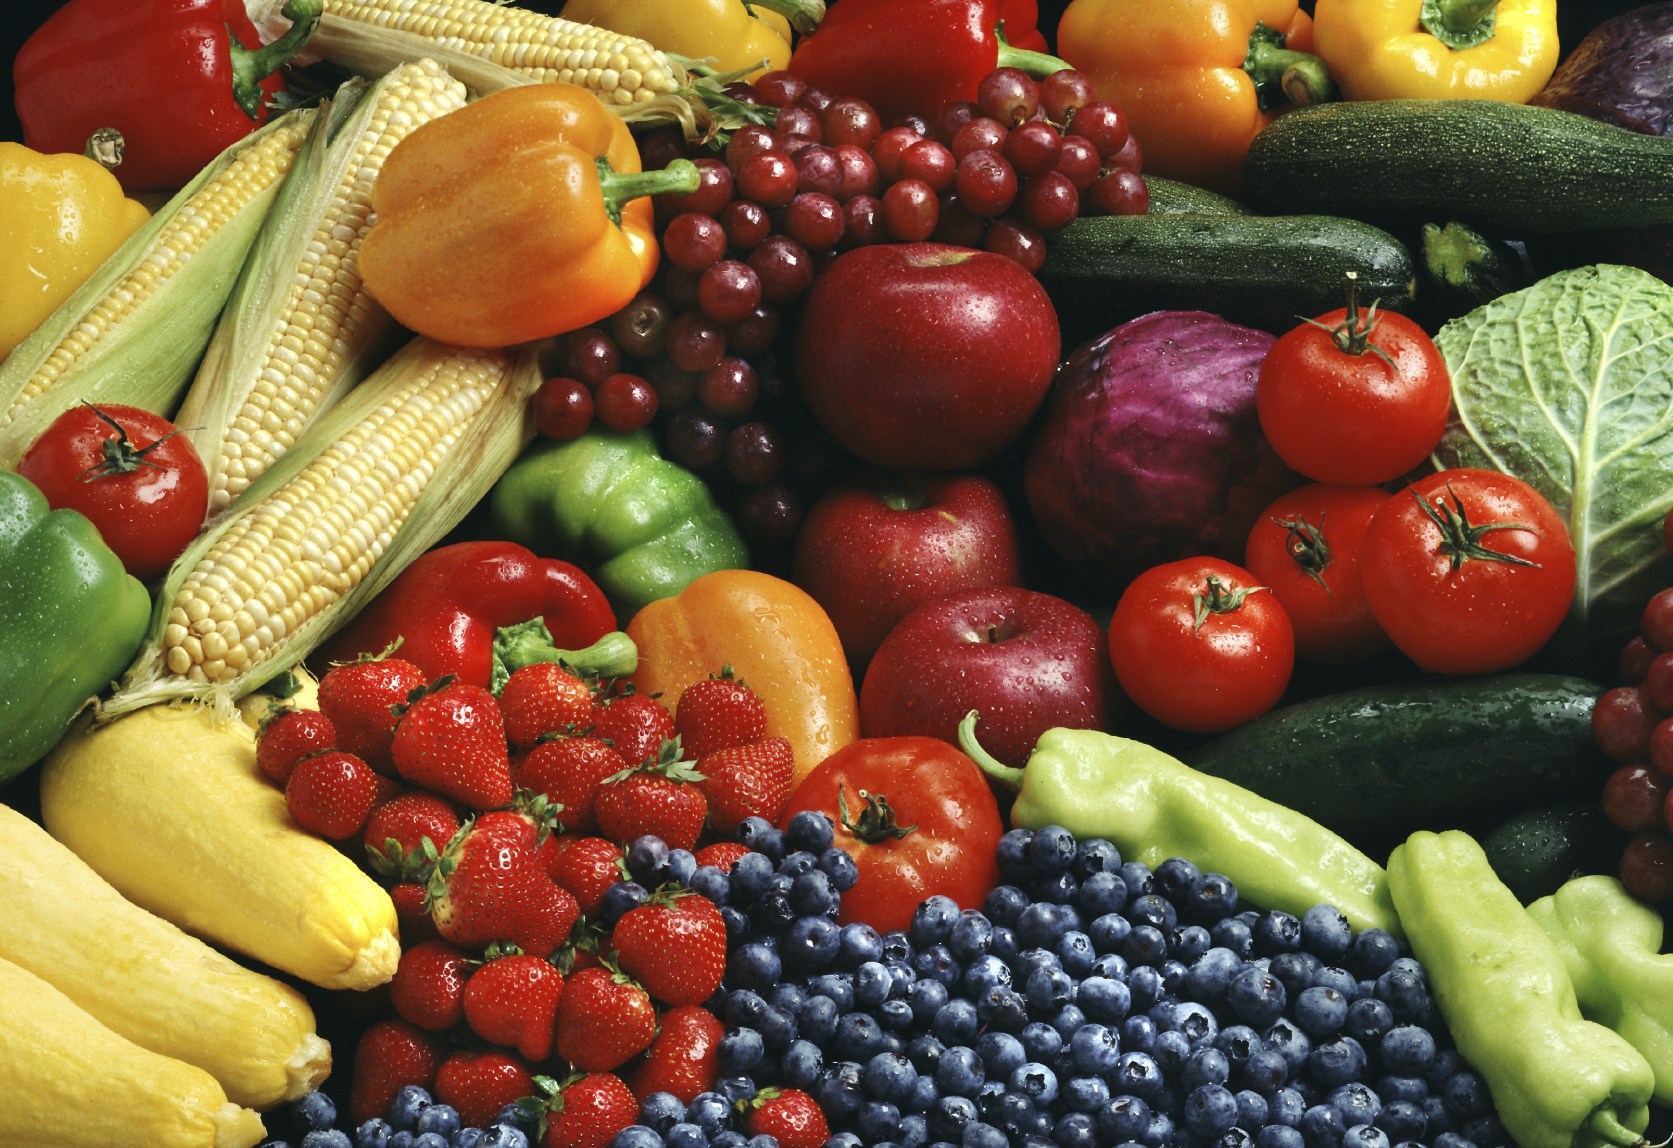 A selection of fruit and vegetables.